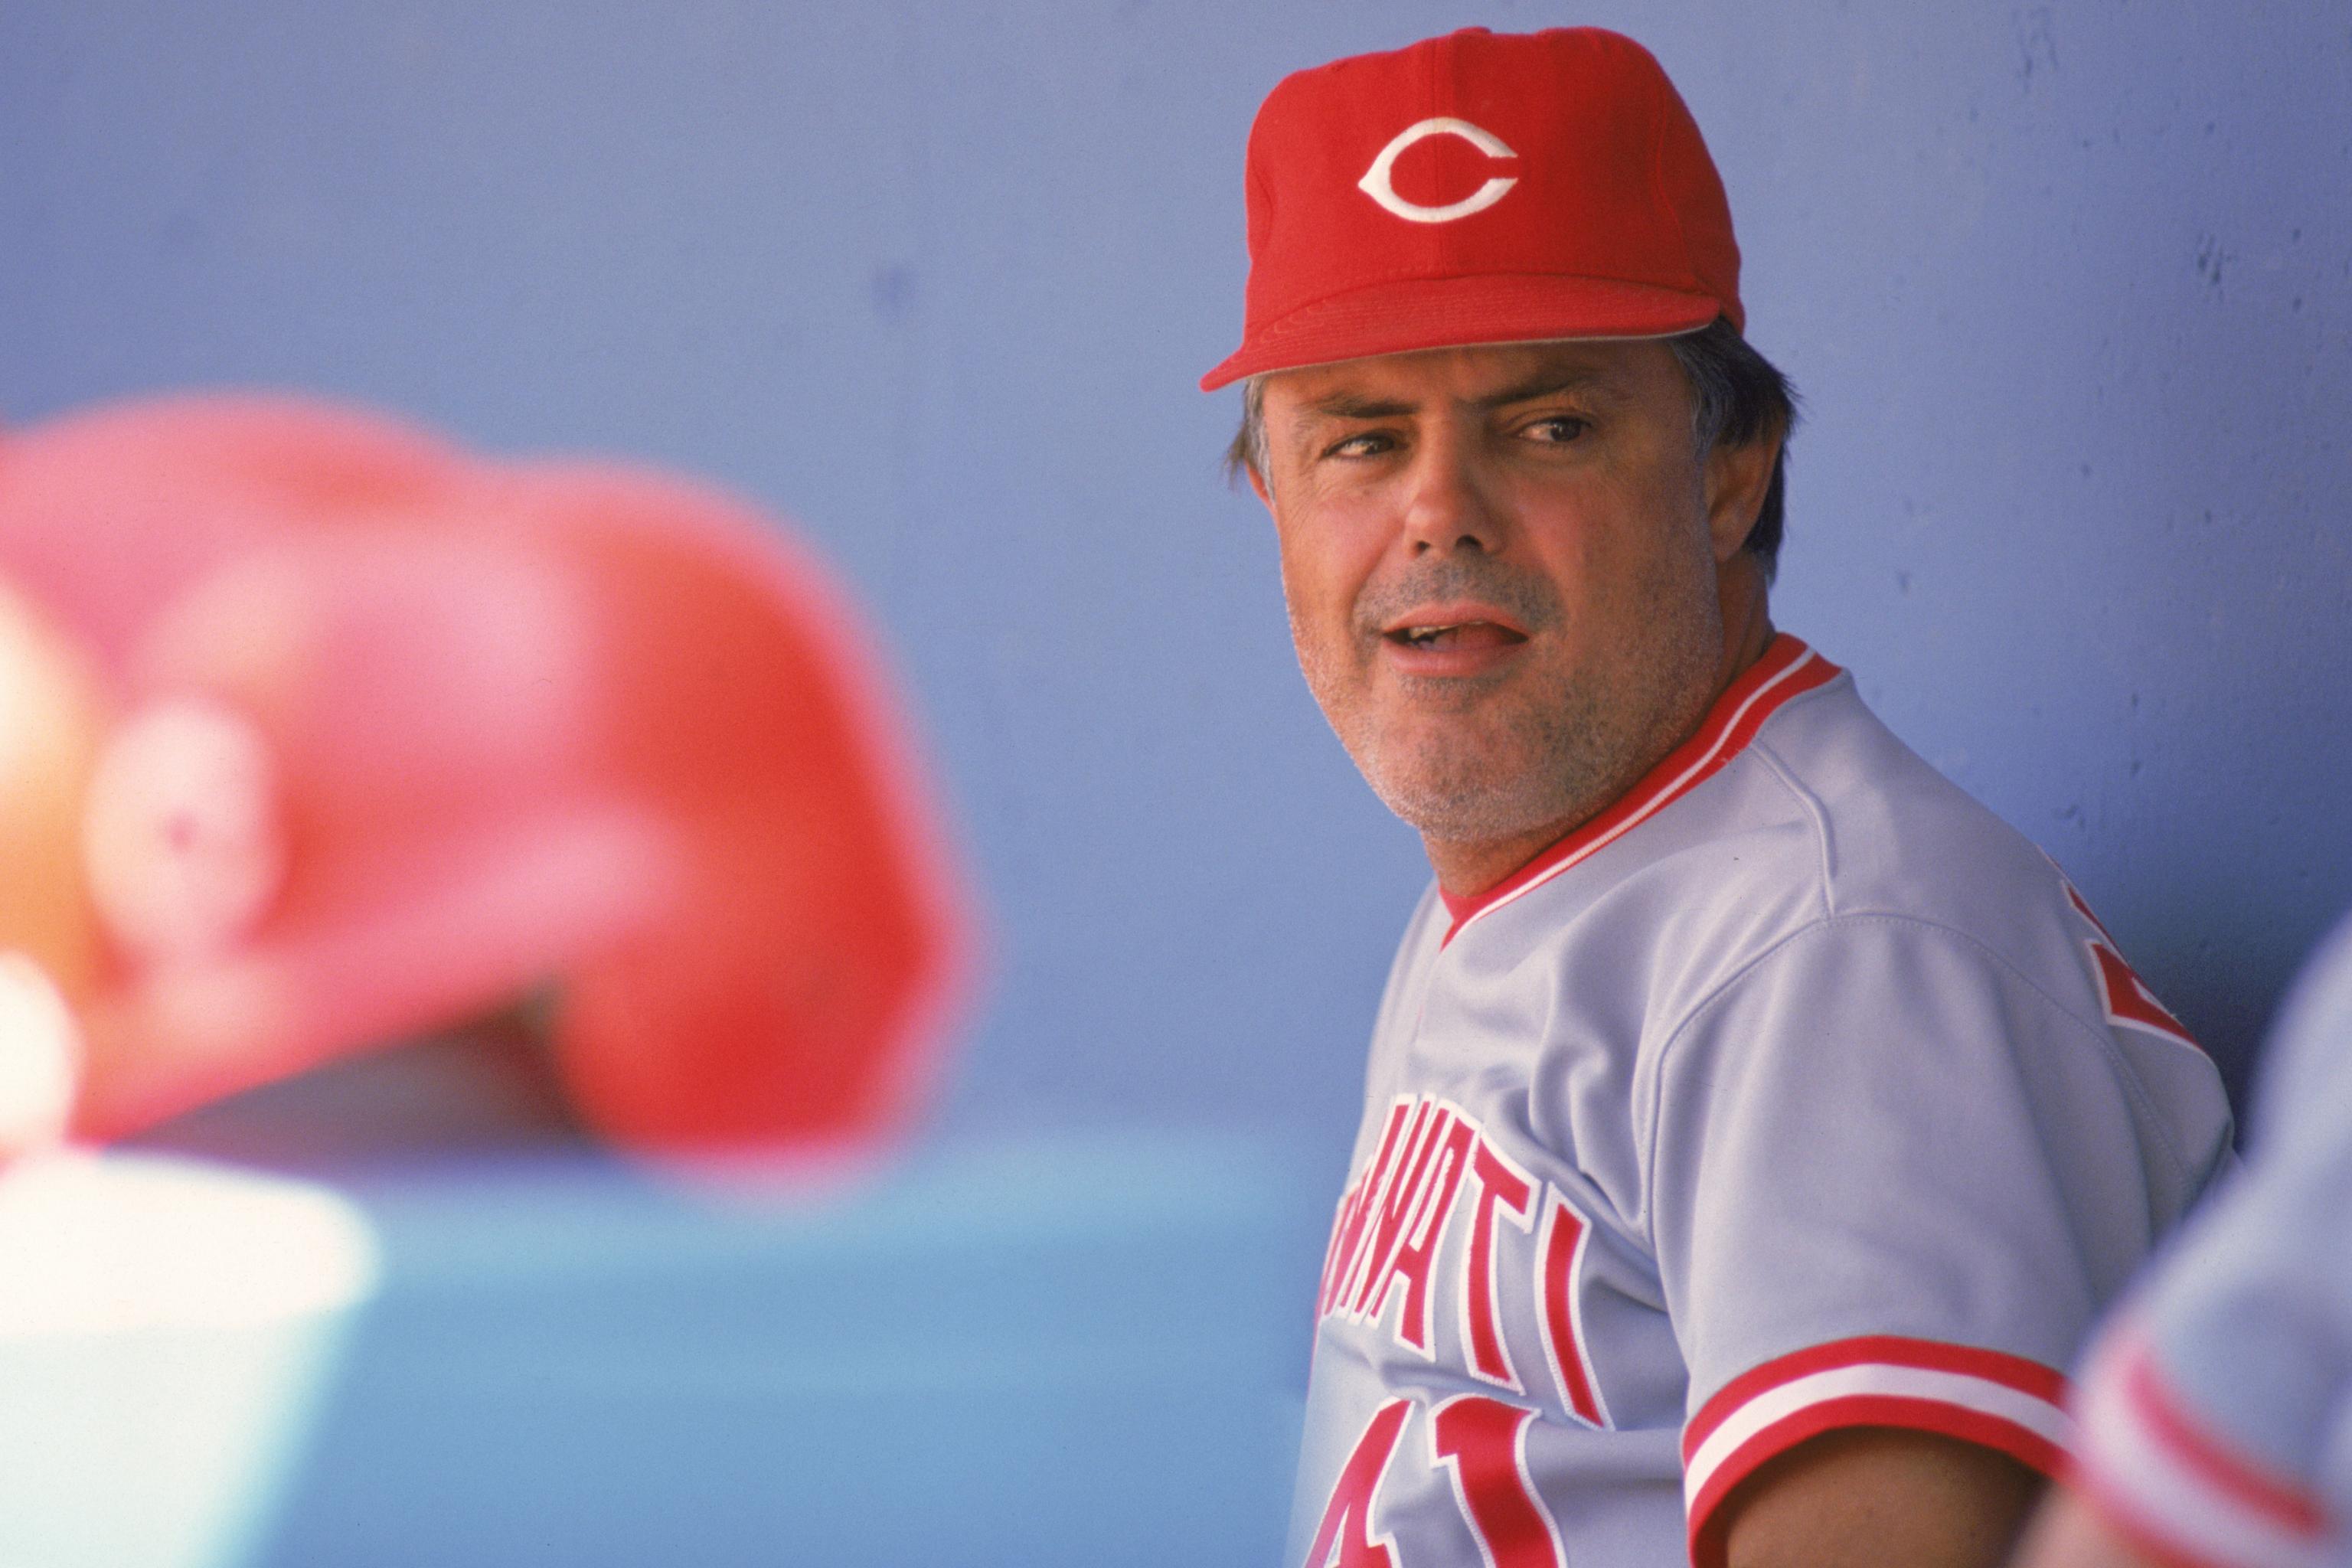 Former professional baseball player and Cincinnati Reds manager